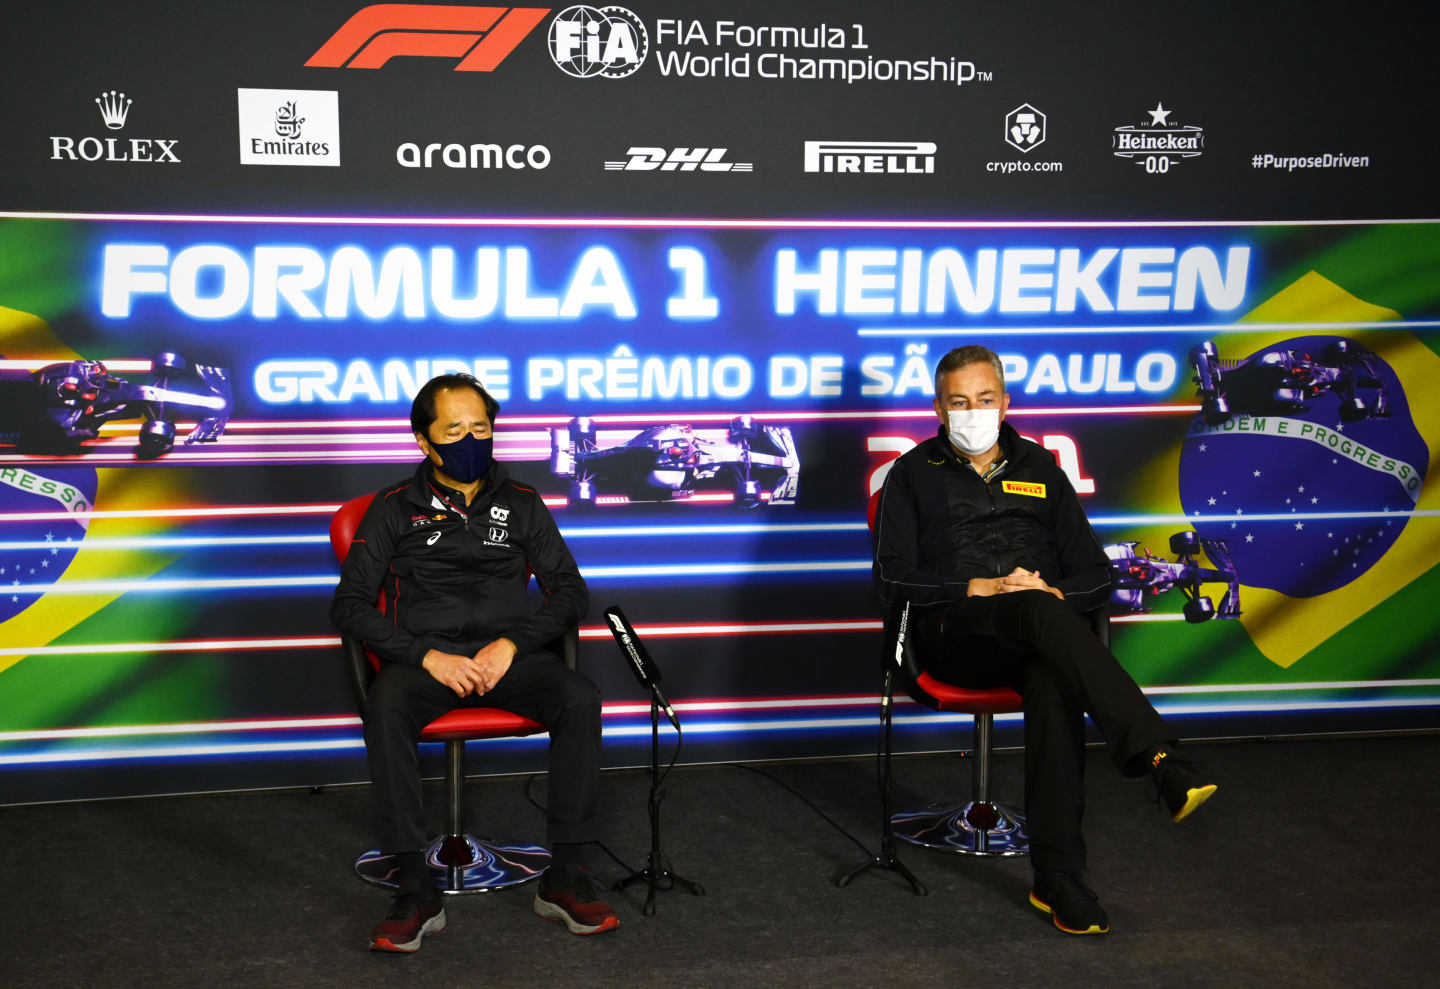 SAO PAULO, BRAZIL - NOVEMBER 12: Toyoharu Tanabe of Honda and Director of Pirelli F1 Mario Isola talk in the Team Principals Press Conference after practice ahead of the F1 Grand Prix of Brazil at Autodromo Jose Carlos Pace on November 12, 2021 in Sao Paulo, Brazil. (Photo by Clive Mason/Getty Images)